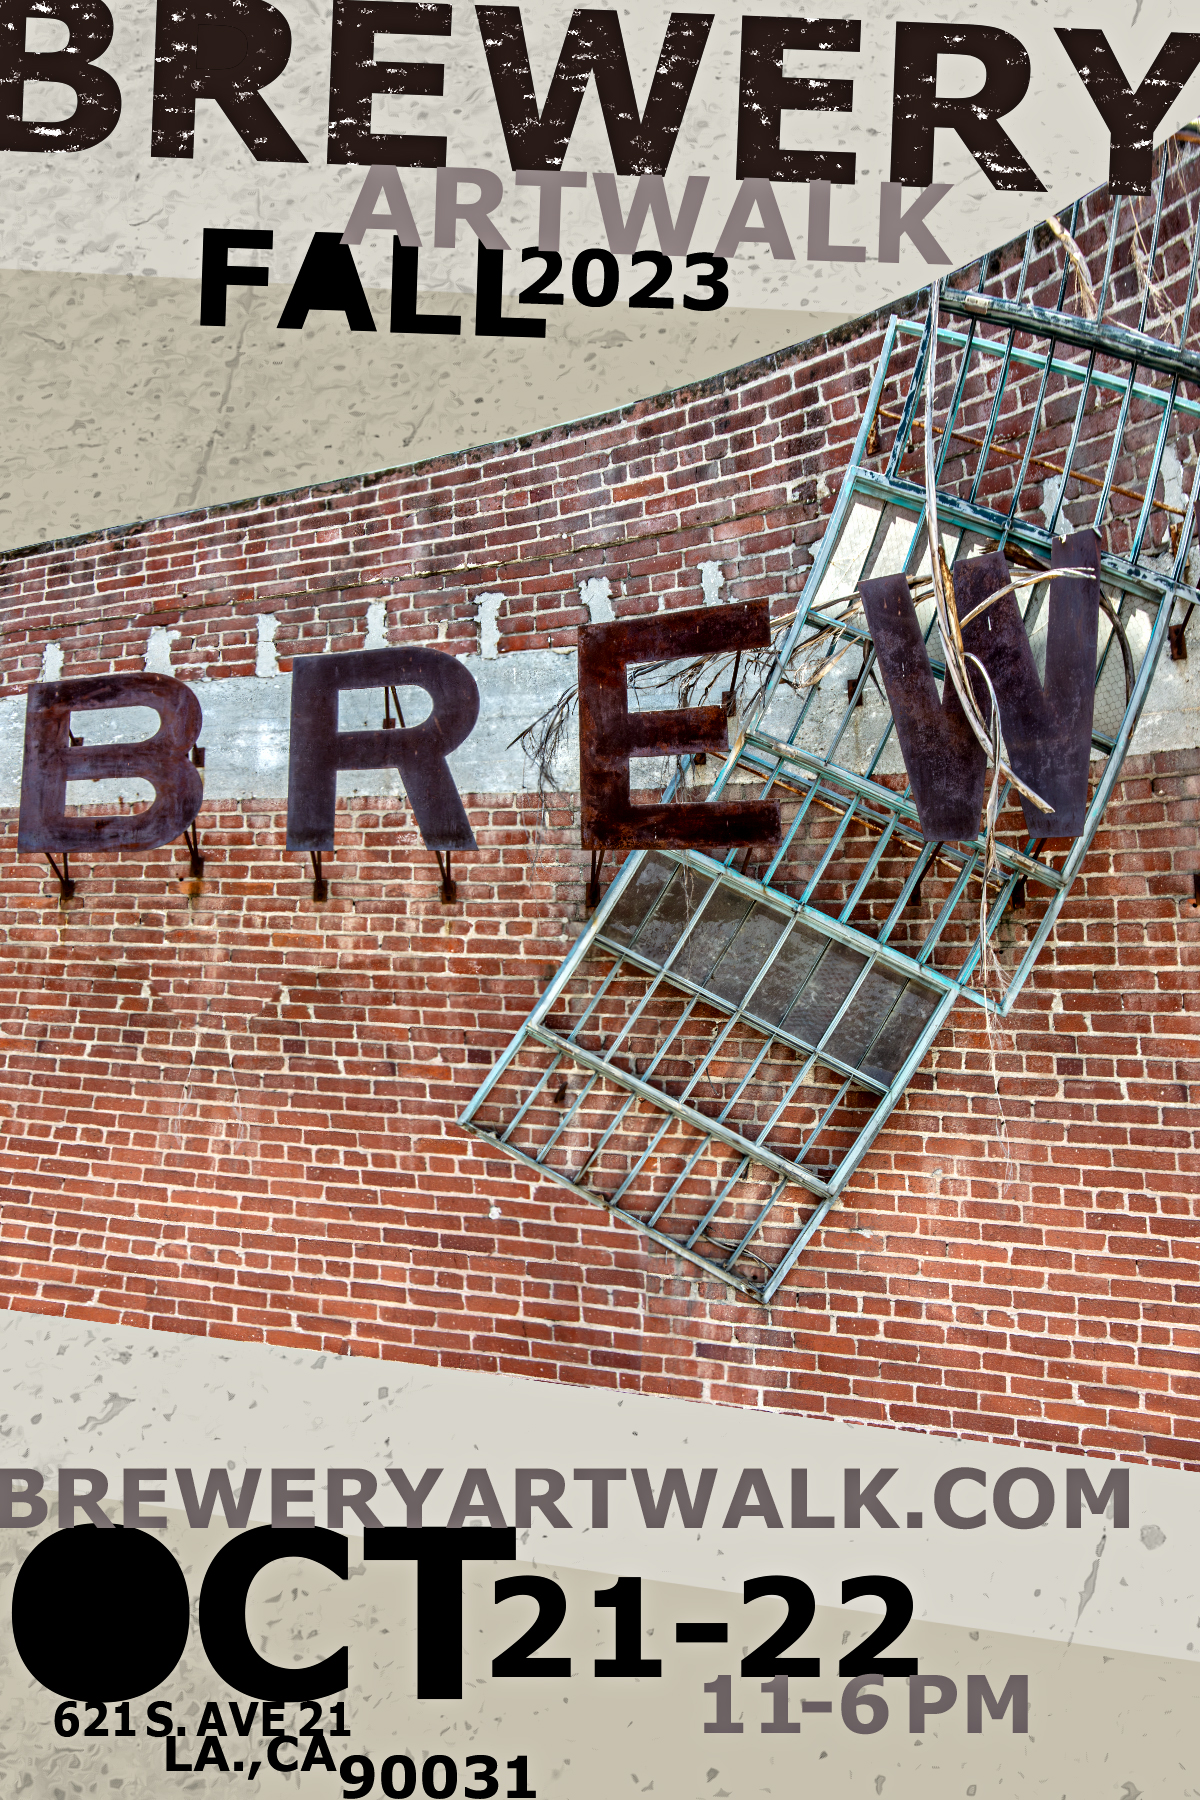 A heavily designed postcard for the twice yearly Brewery Artwalk.